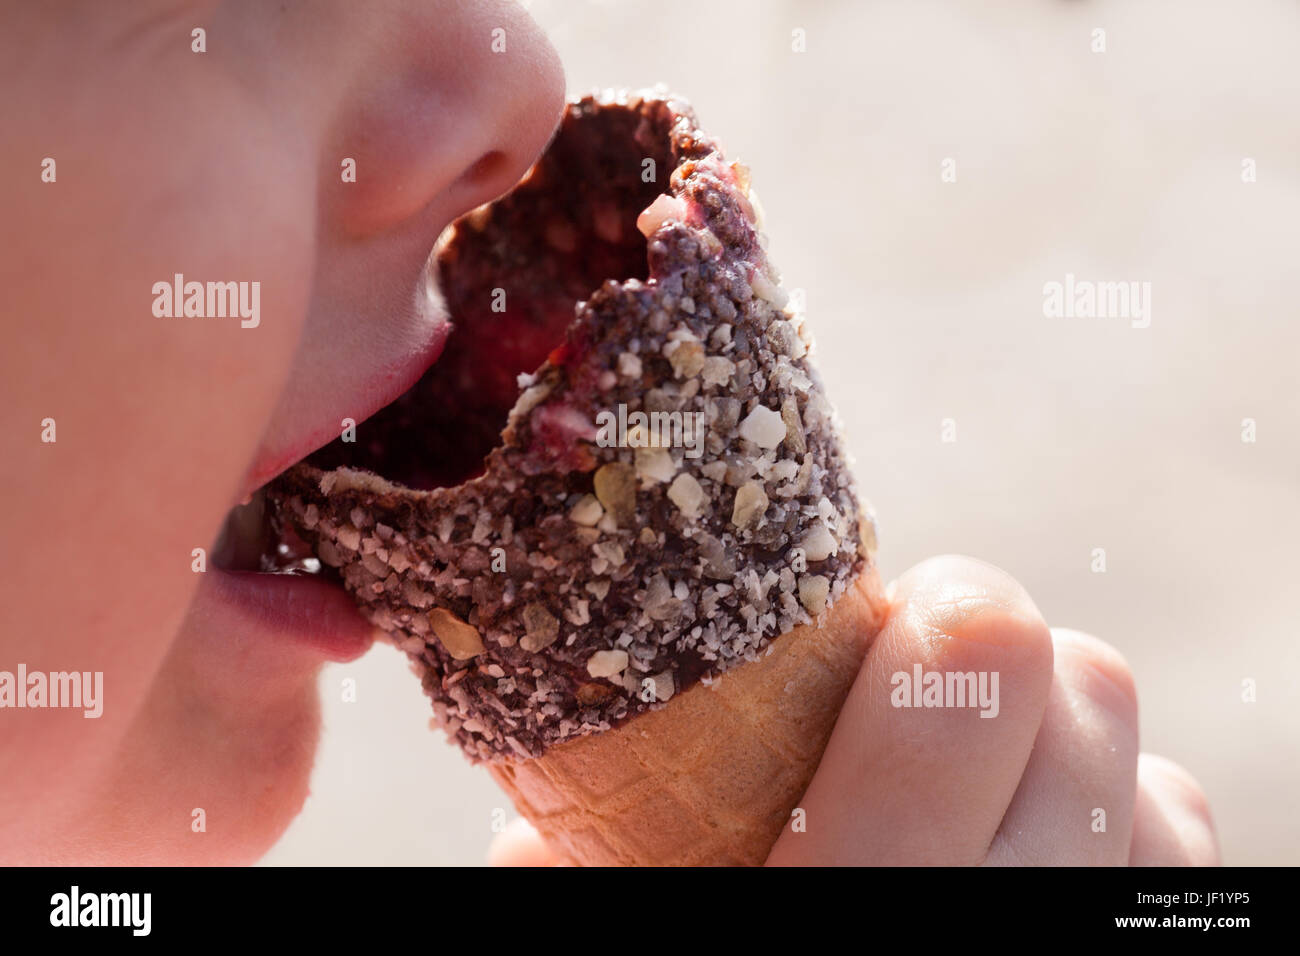 Close up of a child's face and hand eating an ice cream waffle cone covered in chopped nuts and chocolate. Summer theme image. Stock Photo